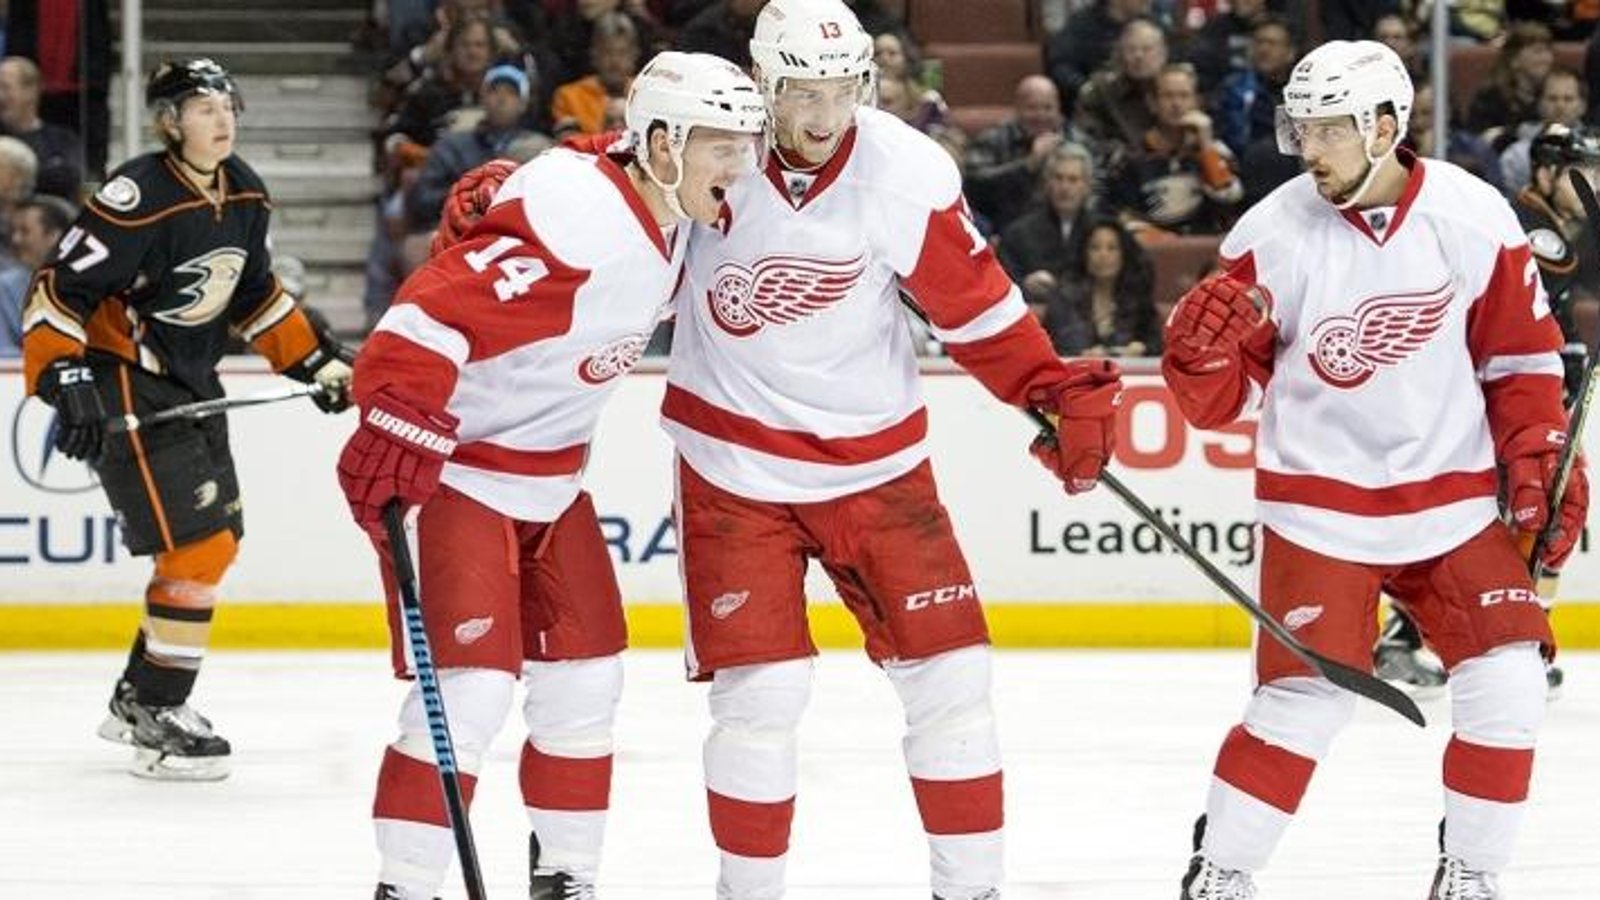 Detroit's young players talk Datsyuk, Zetterberg, and who's to blame for disappointing season.